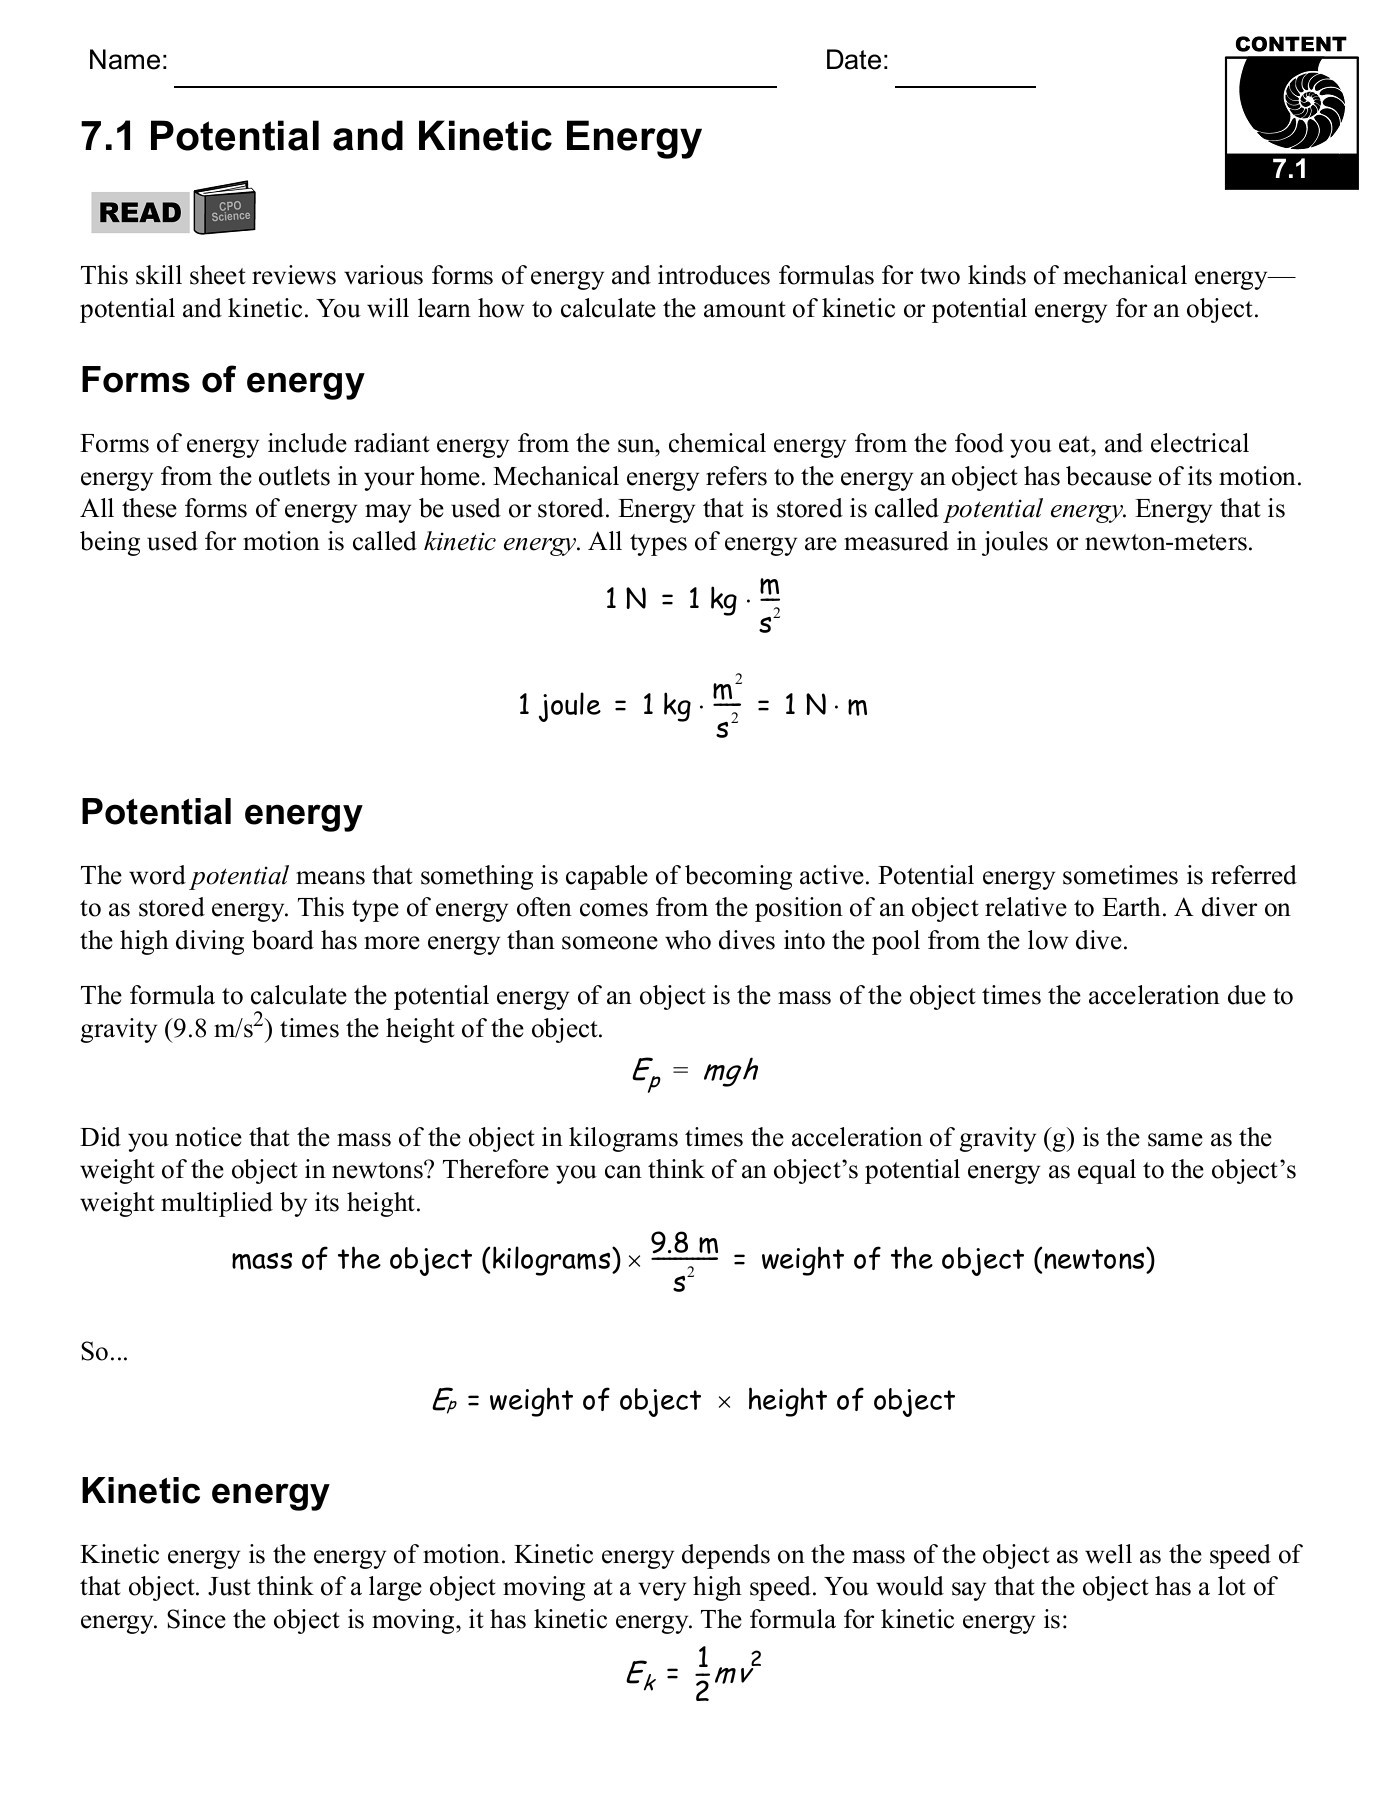 Potential and Kinetic Energy Worksheet 7 1 Potential and Kinetic Energy Cpo Science Pages 1 29